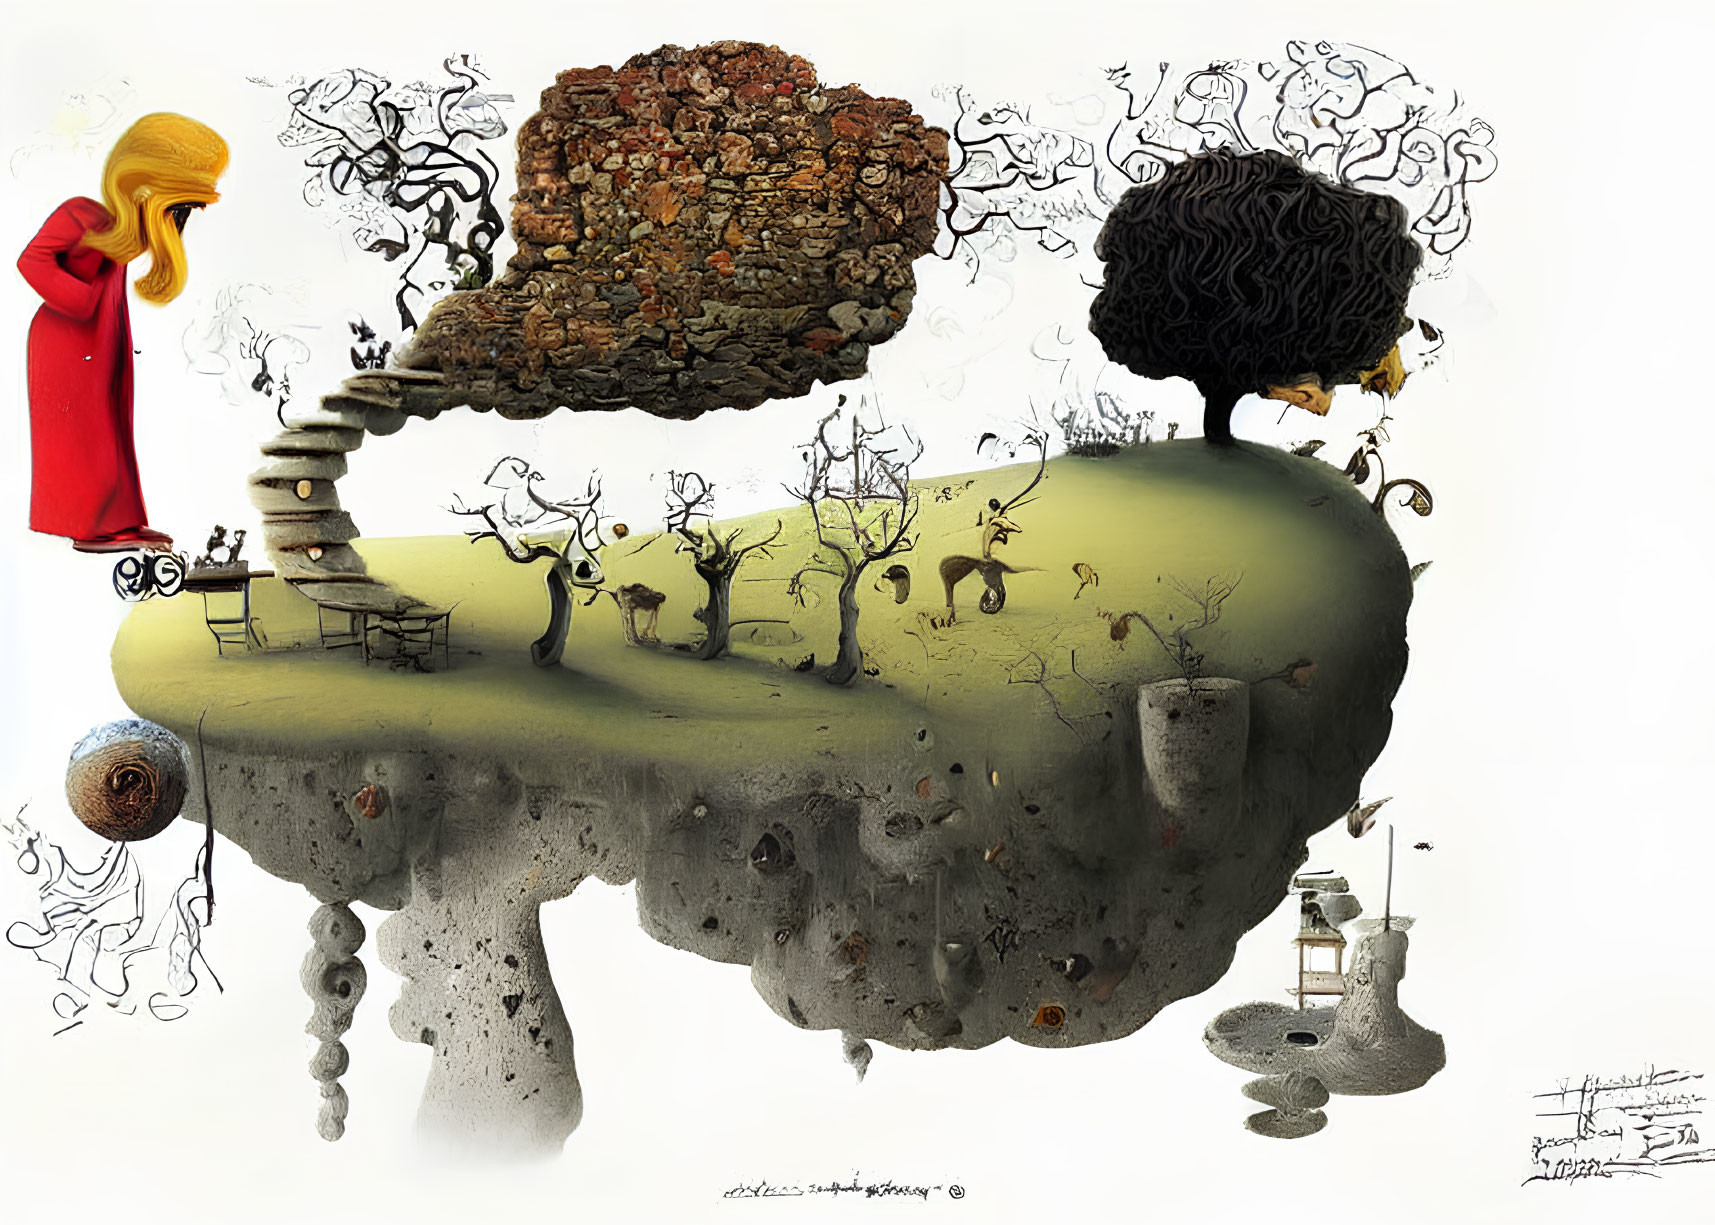 Surreal Artwork: Floating Island, Stylized Trees, Exaggerated Human Figures,